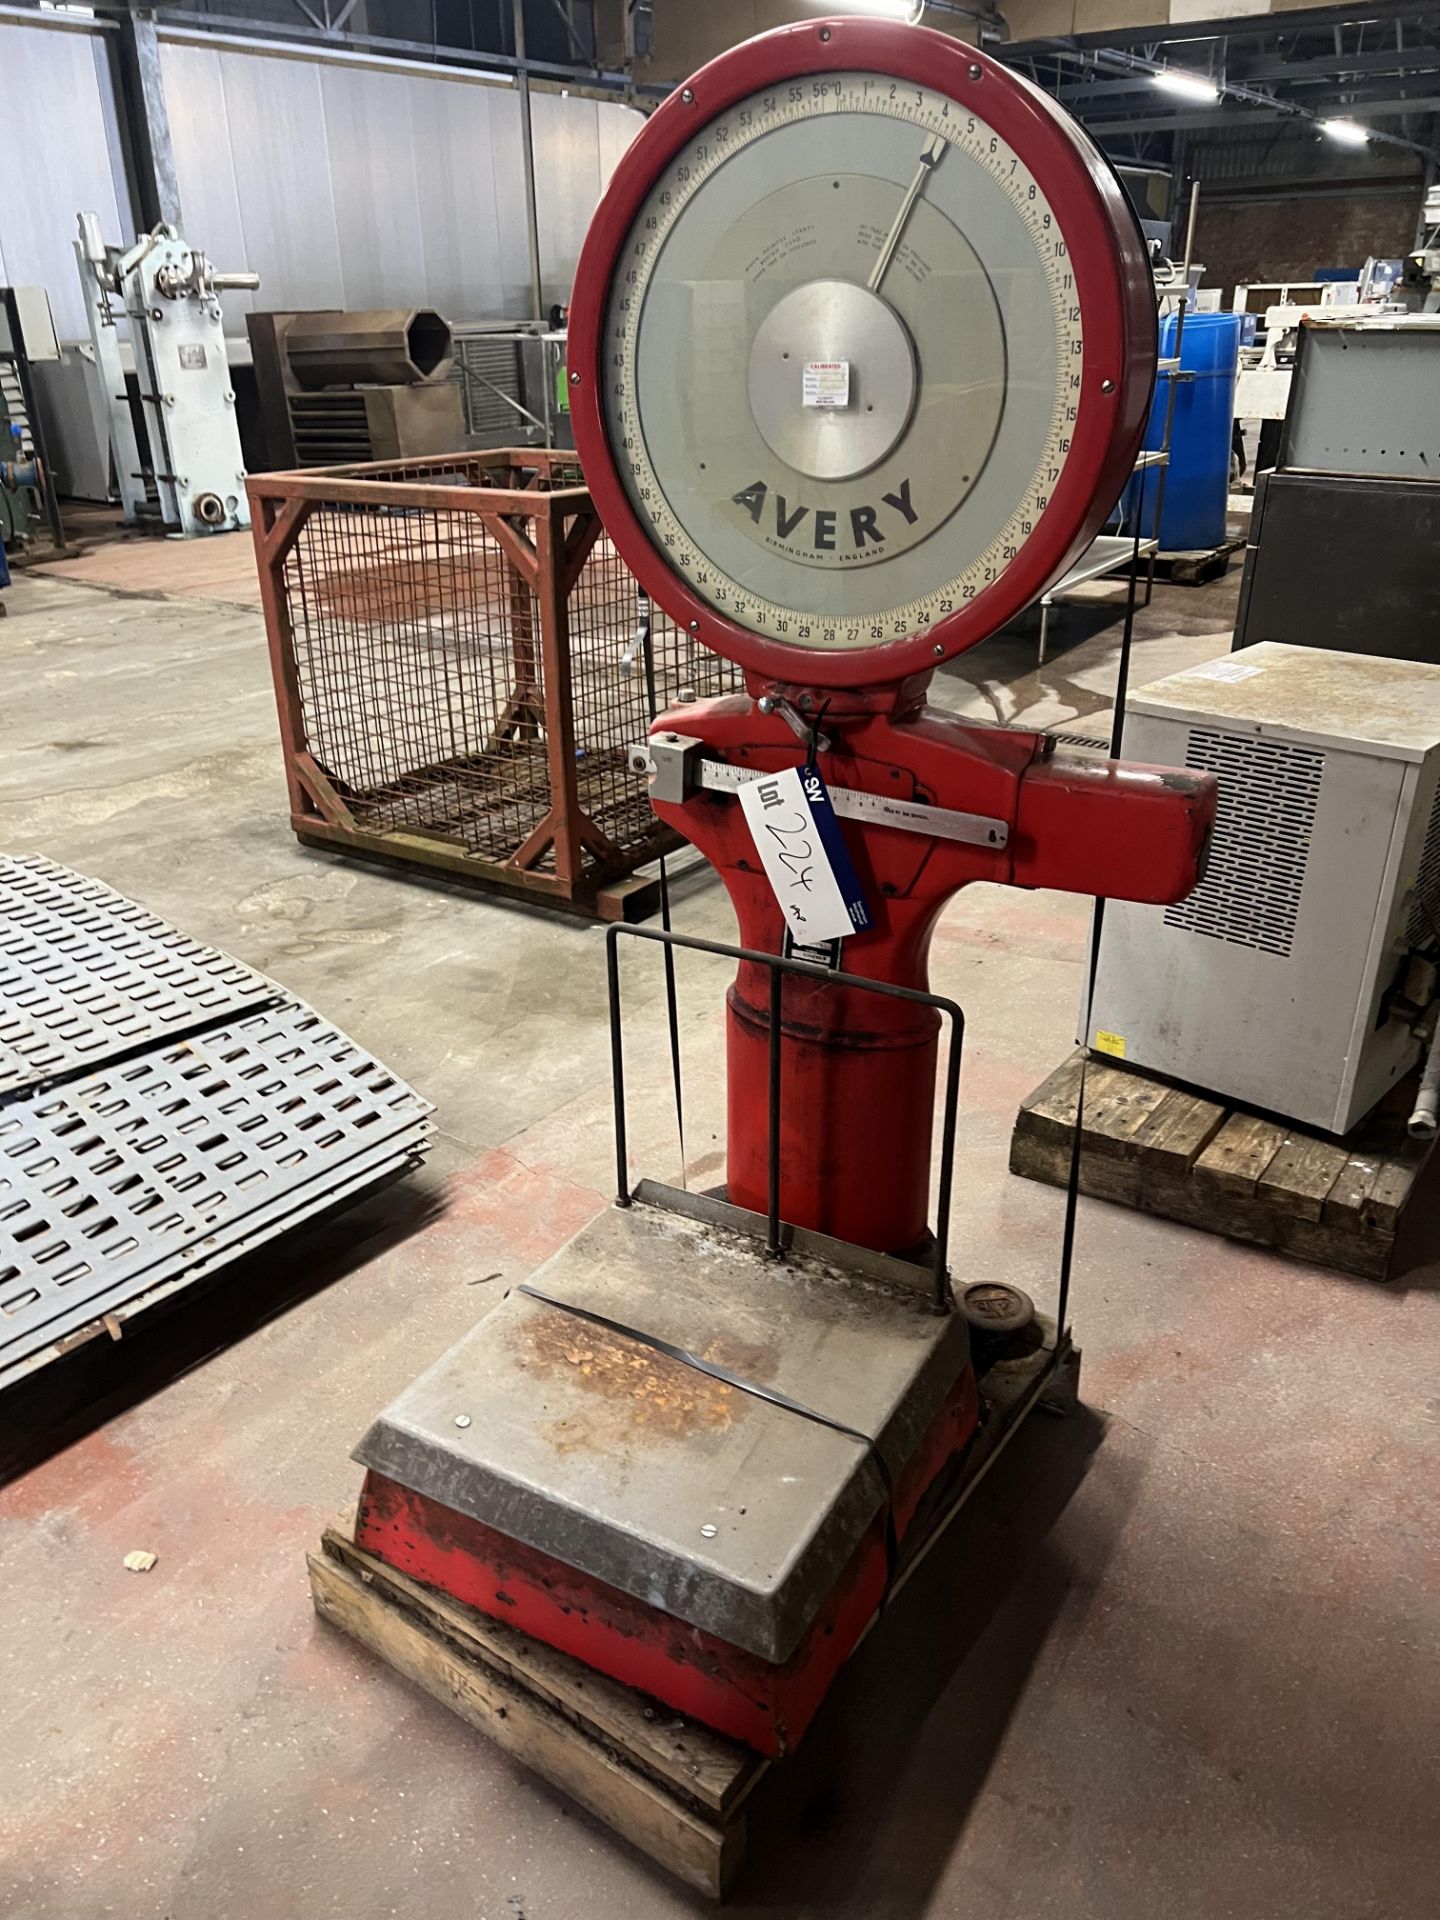 Avery Old Style Platform Scale, with tare bar, approx. 500mm x 500mm platform, lift out charge - £20